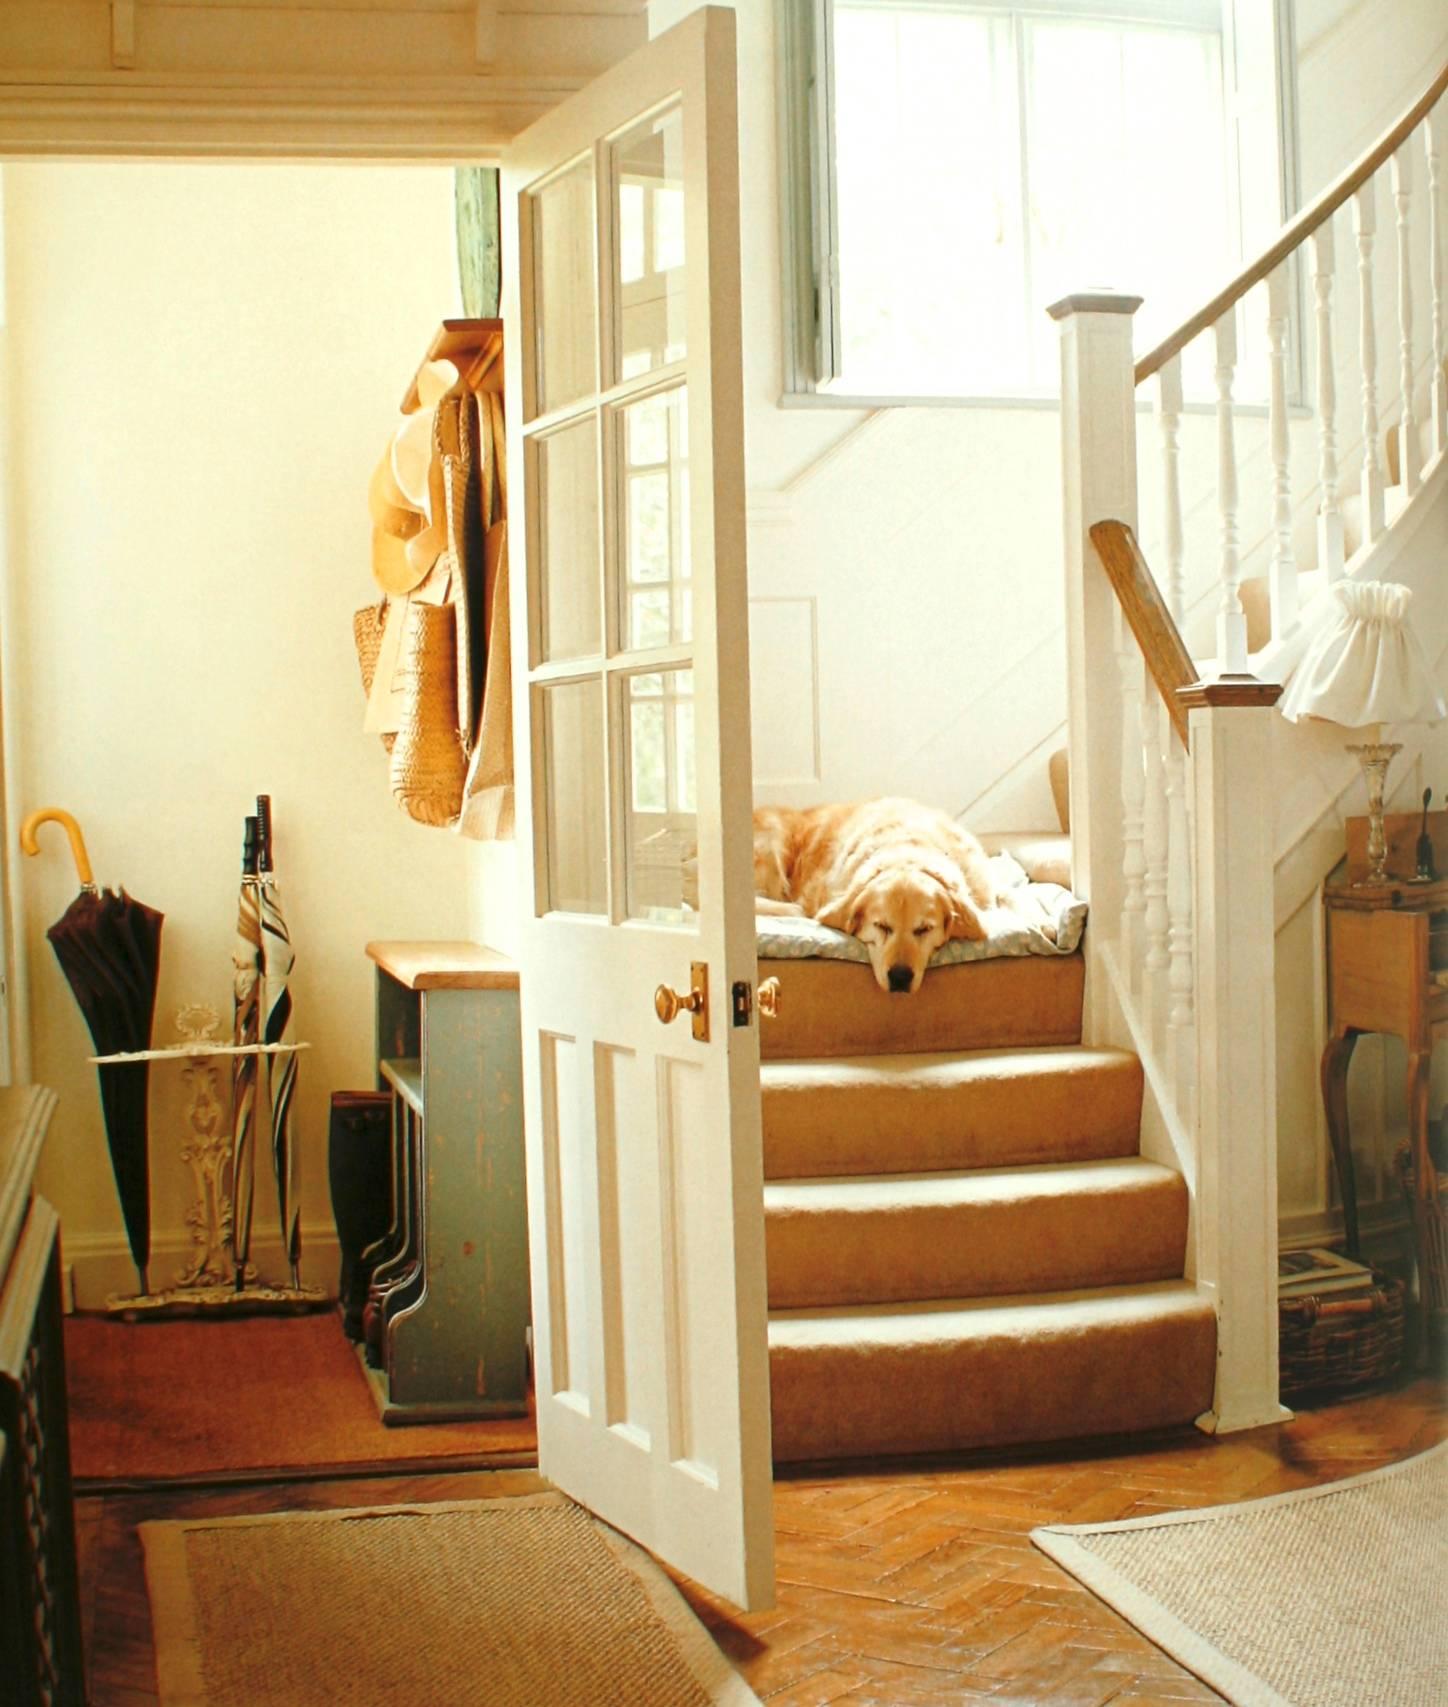 Hallyways, Corridors and Staircases, developing the decorative and practical potential of every corner of your home by Leslie Geddes-Brown. New York: Ryland Peters and Small, 2002. First edition hardcover with dust jacket. 192 pp. A coffee table